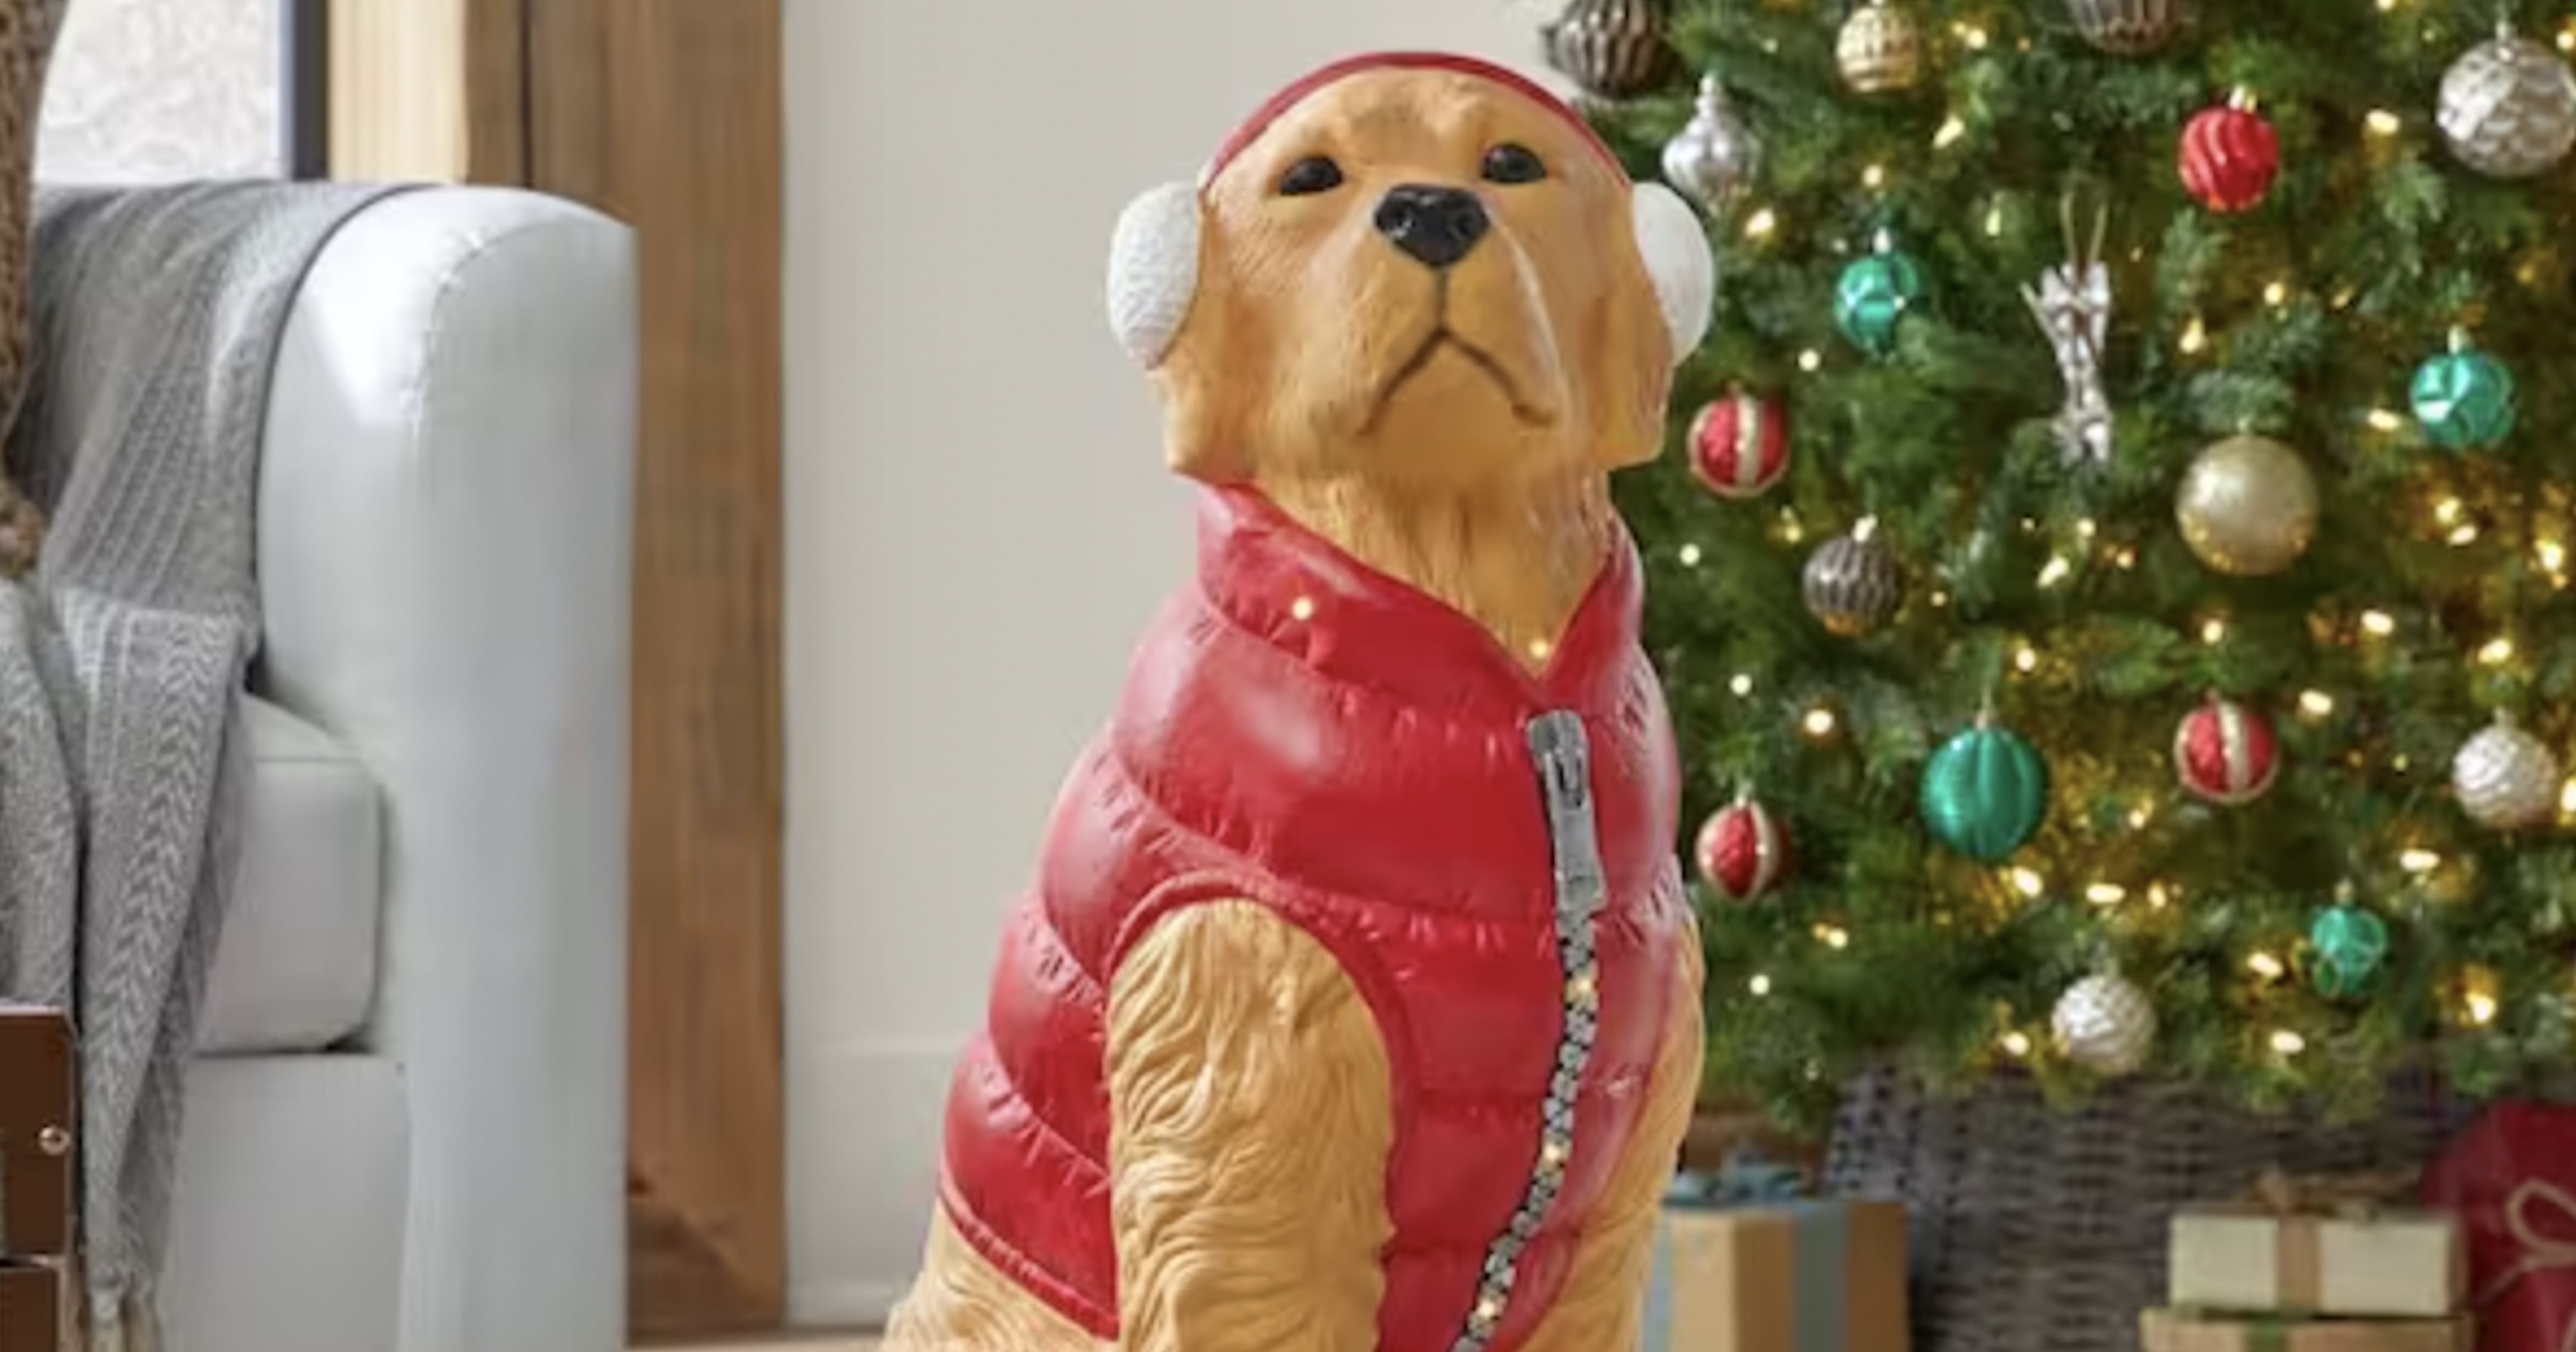 Shop Home Depot’s Holiday Dog Statues, From Golden Retrievers to Bernese Mountain Dogs